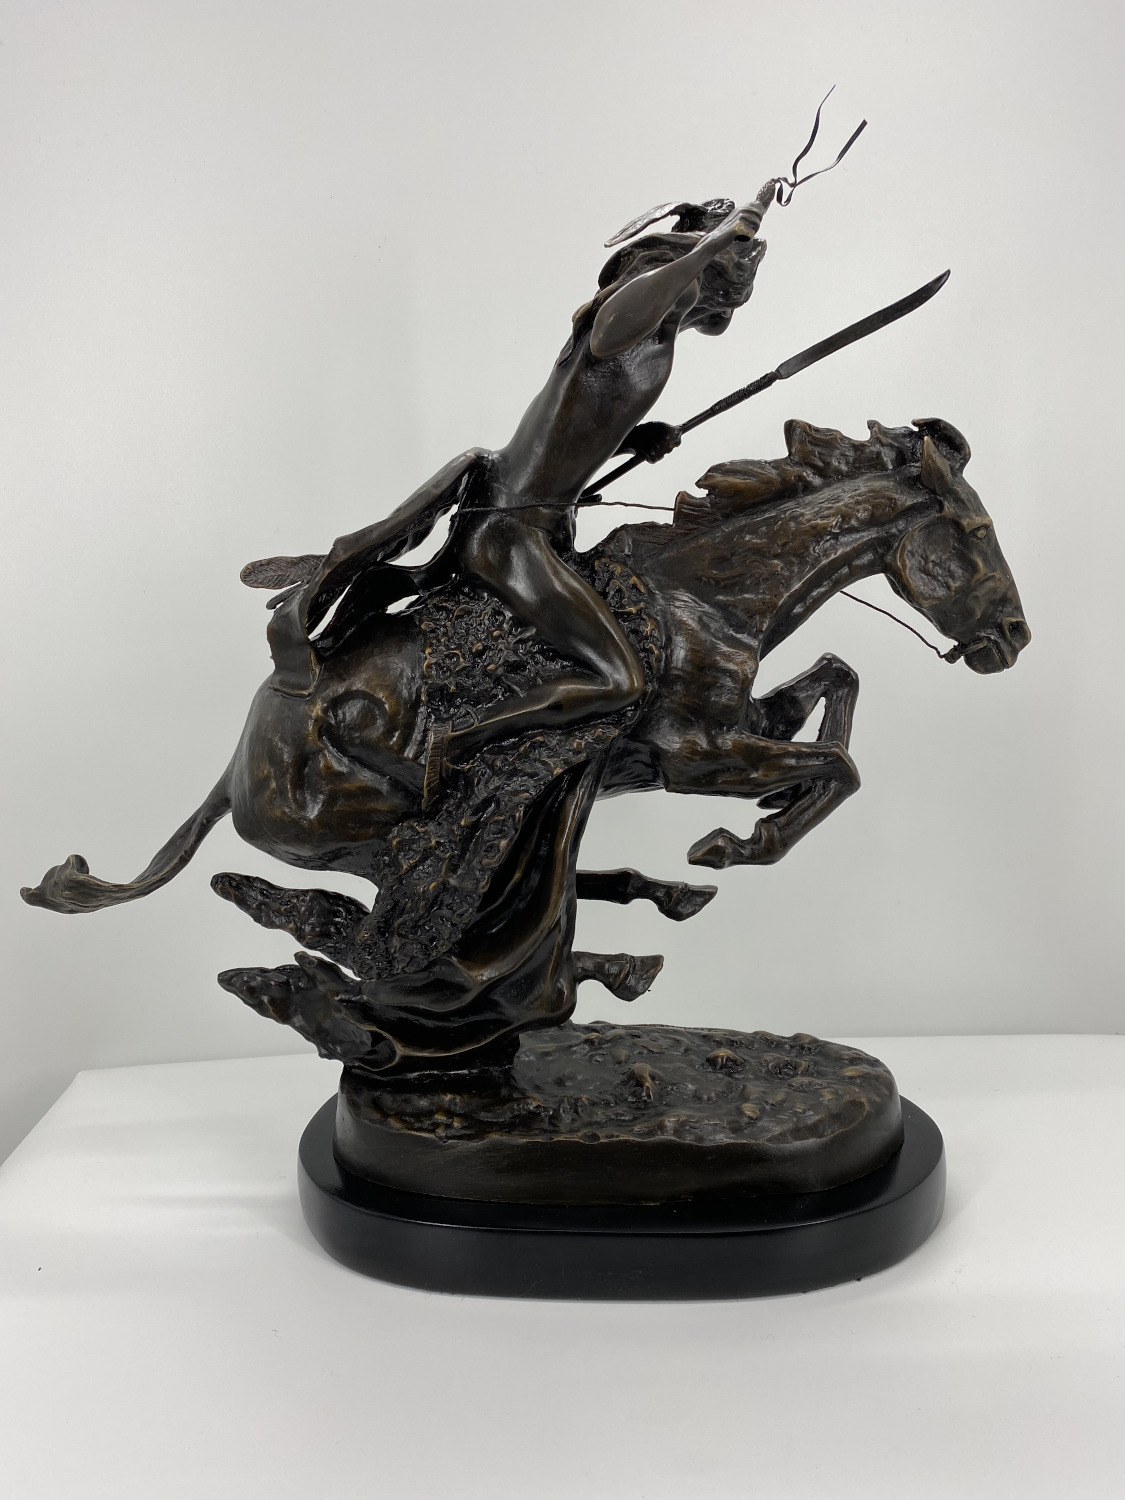 Frederic Remington Solid American Bronze Statue "Cheyenne" baby size 8"H x 8"L x 3.5"W - image 4 of 6